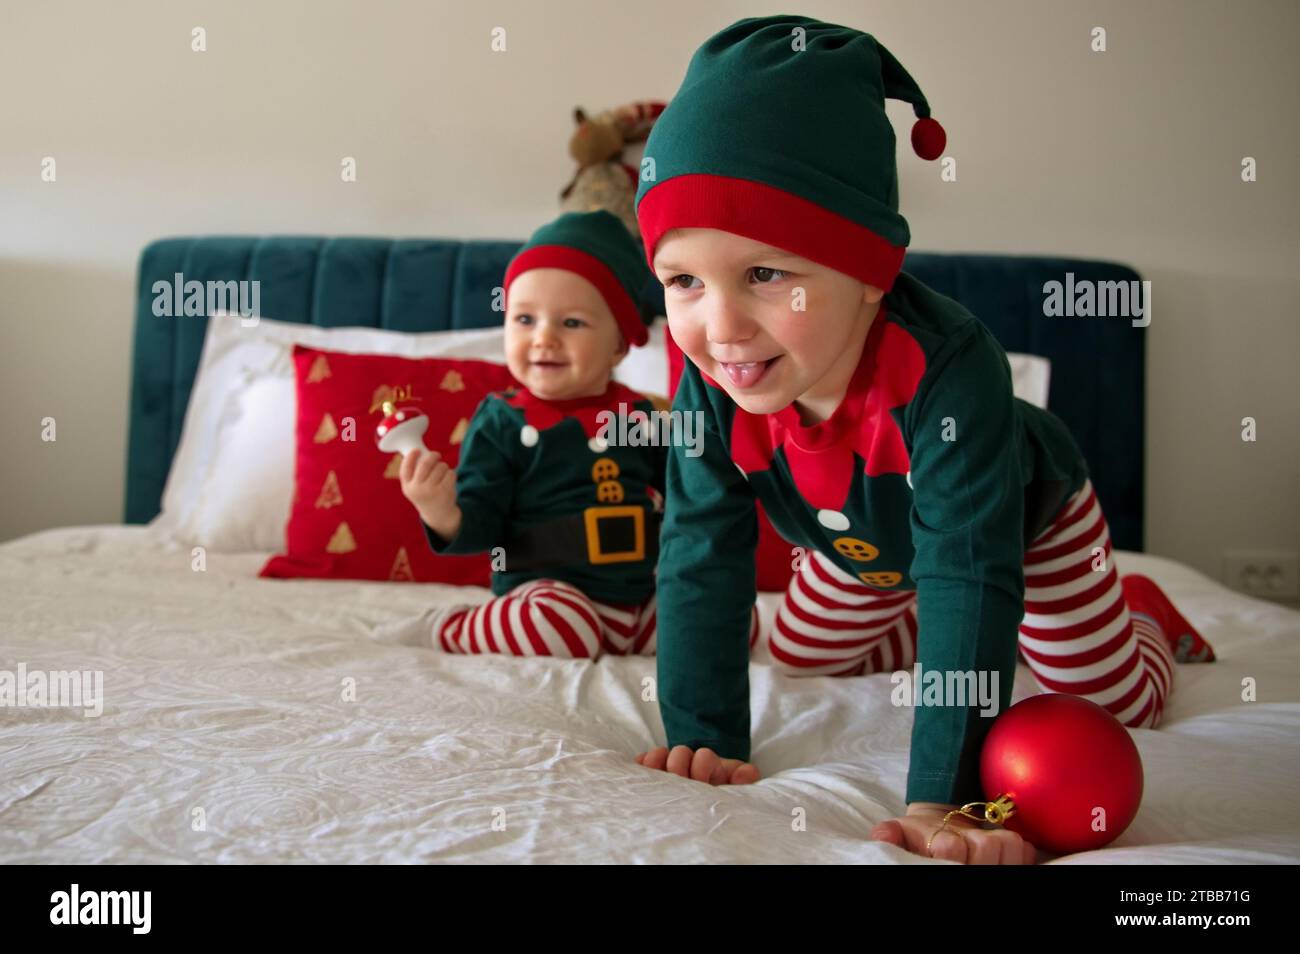 Baby girl and toddler dressed as elves having fun on a bed Stock Photo